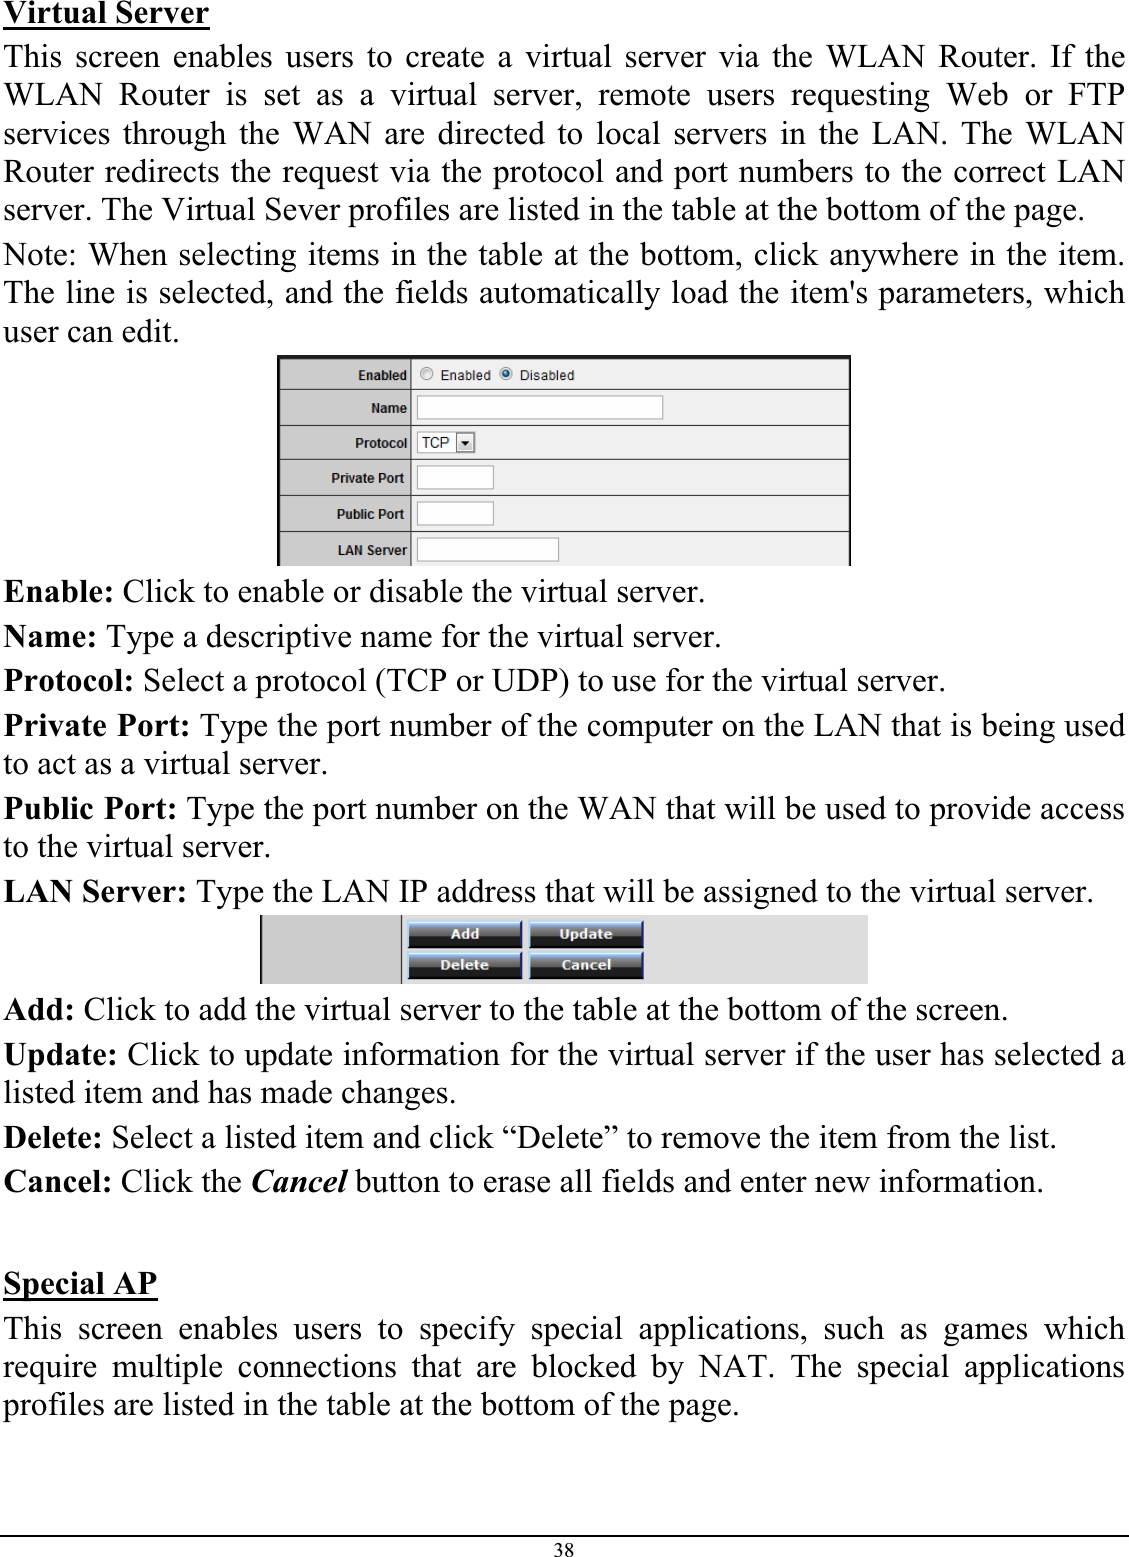 38Virtual ServerThis screen enables users to create a virtual server via the WLAN Router. If the WLAN Router is set as a virtual server, remote users requesting Web or FTP services through the WAN are directed to local servers in the LAN. The WLAN Router redirects the request via the protocol and port numbers to the correct LAN server. The Virtual Sever profiles are listed in the table at the bottom of the page. Note: When selecting items in the table at the bottom, click anywhere in the item. The line is selected, and the fields automatically load the item&apos;s parameters, which user can edit. Enable: Click to enable or disable the virtual server. Name: Type a descriptive name for the virtual server. Protocol: Select a protocol (TCP or UDP) to use for the virtual server. Private Port: Type the port number of the computer on the LAN that is being used to act as a virtual server. Public Port: Type the port number on the WAN that will be used to provide access to the virtual server. LAN Server: Type the LAN IP address that will be assigned to the virtual server. Add: Click to add the virtual server to the table at the bottom of the screen. Update: Click to update information for the virtual server if the user has selected a listed item and has made changes. Delete: Select a listed item and click “Delete” to remove the item from the list. Cancel: Click the Cancel button to erase all fields and enter new information. Special APThis screen enables users to specify special applications, such as games which require multiple connections that are blocked by NAT. The special applications profiles are listed in the table at the bottom of the page. 